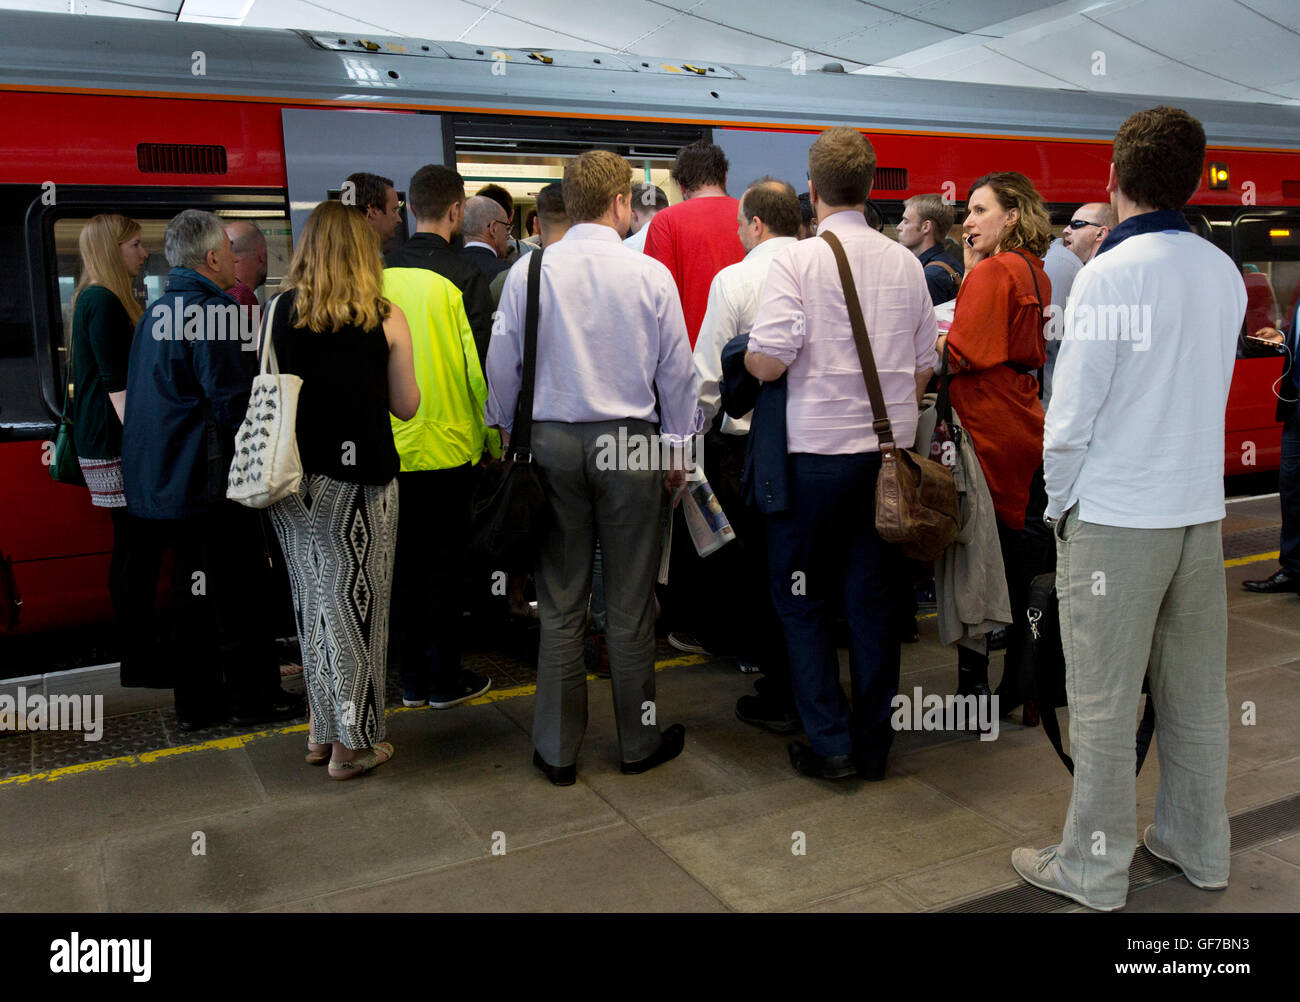 Commuters waiting to board a train at Blackfriars station, London, during the evening rush hour, as Department for Transport figures show that the station has the highest percentage of passengers above the official capacity for their service out of all major stations in the capital at 14% in the morning peak. Stock Photo